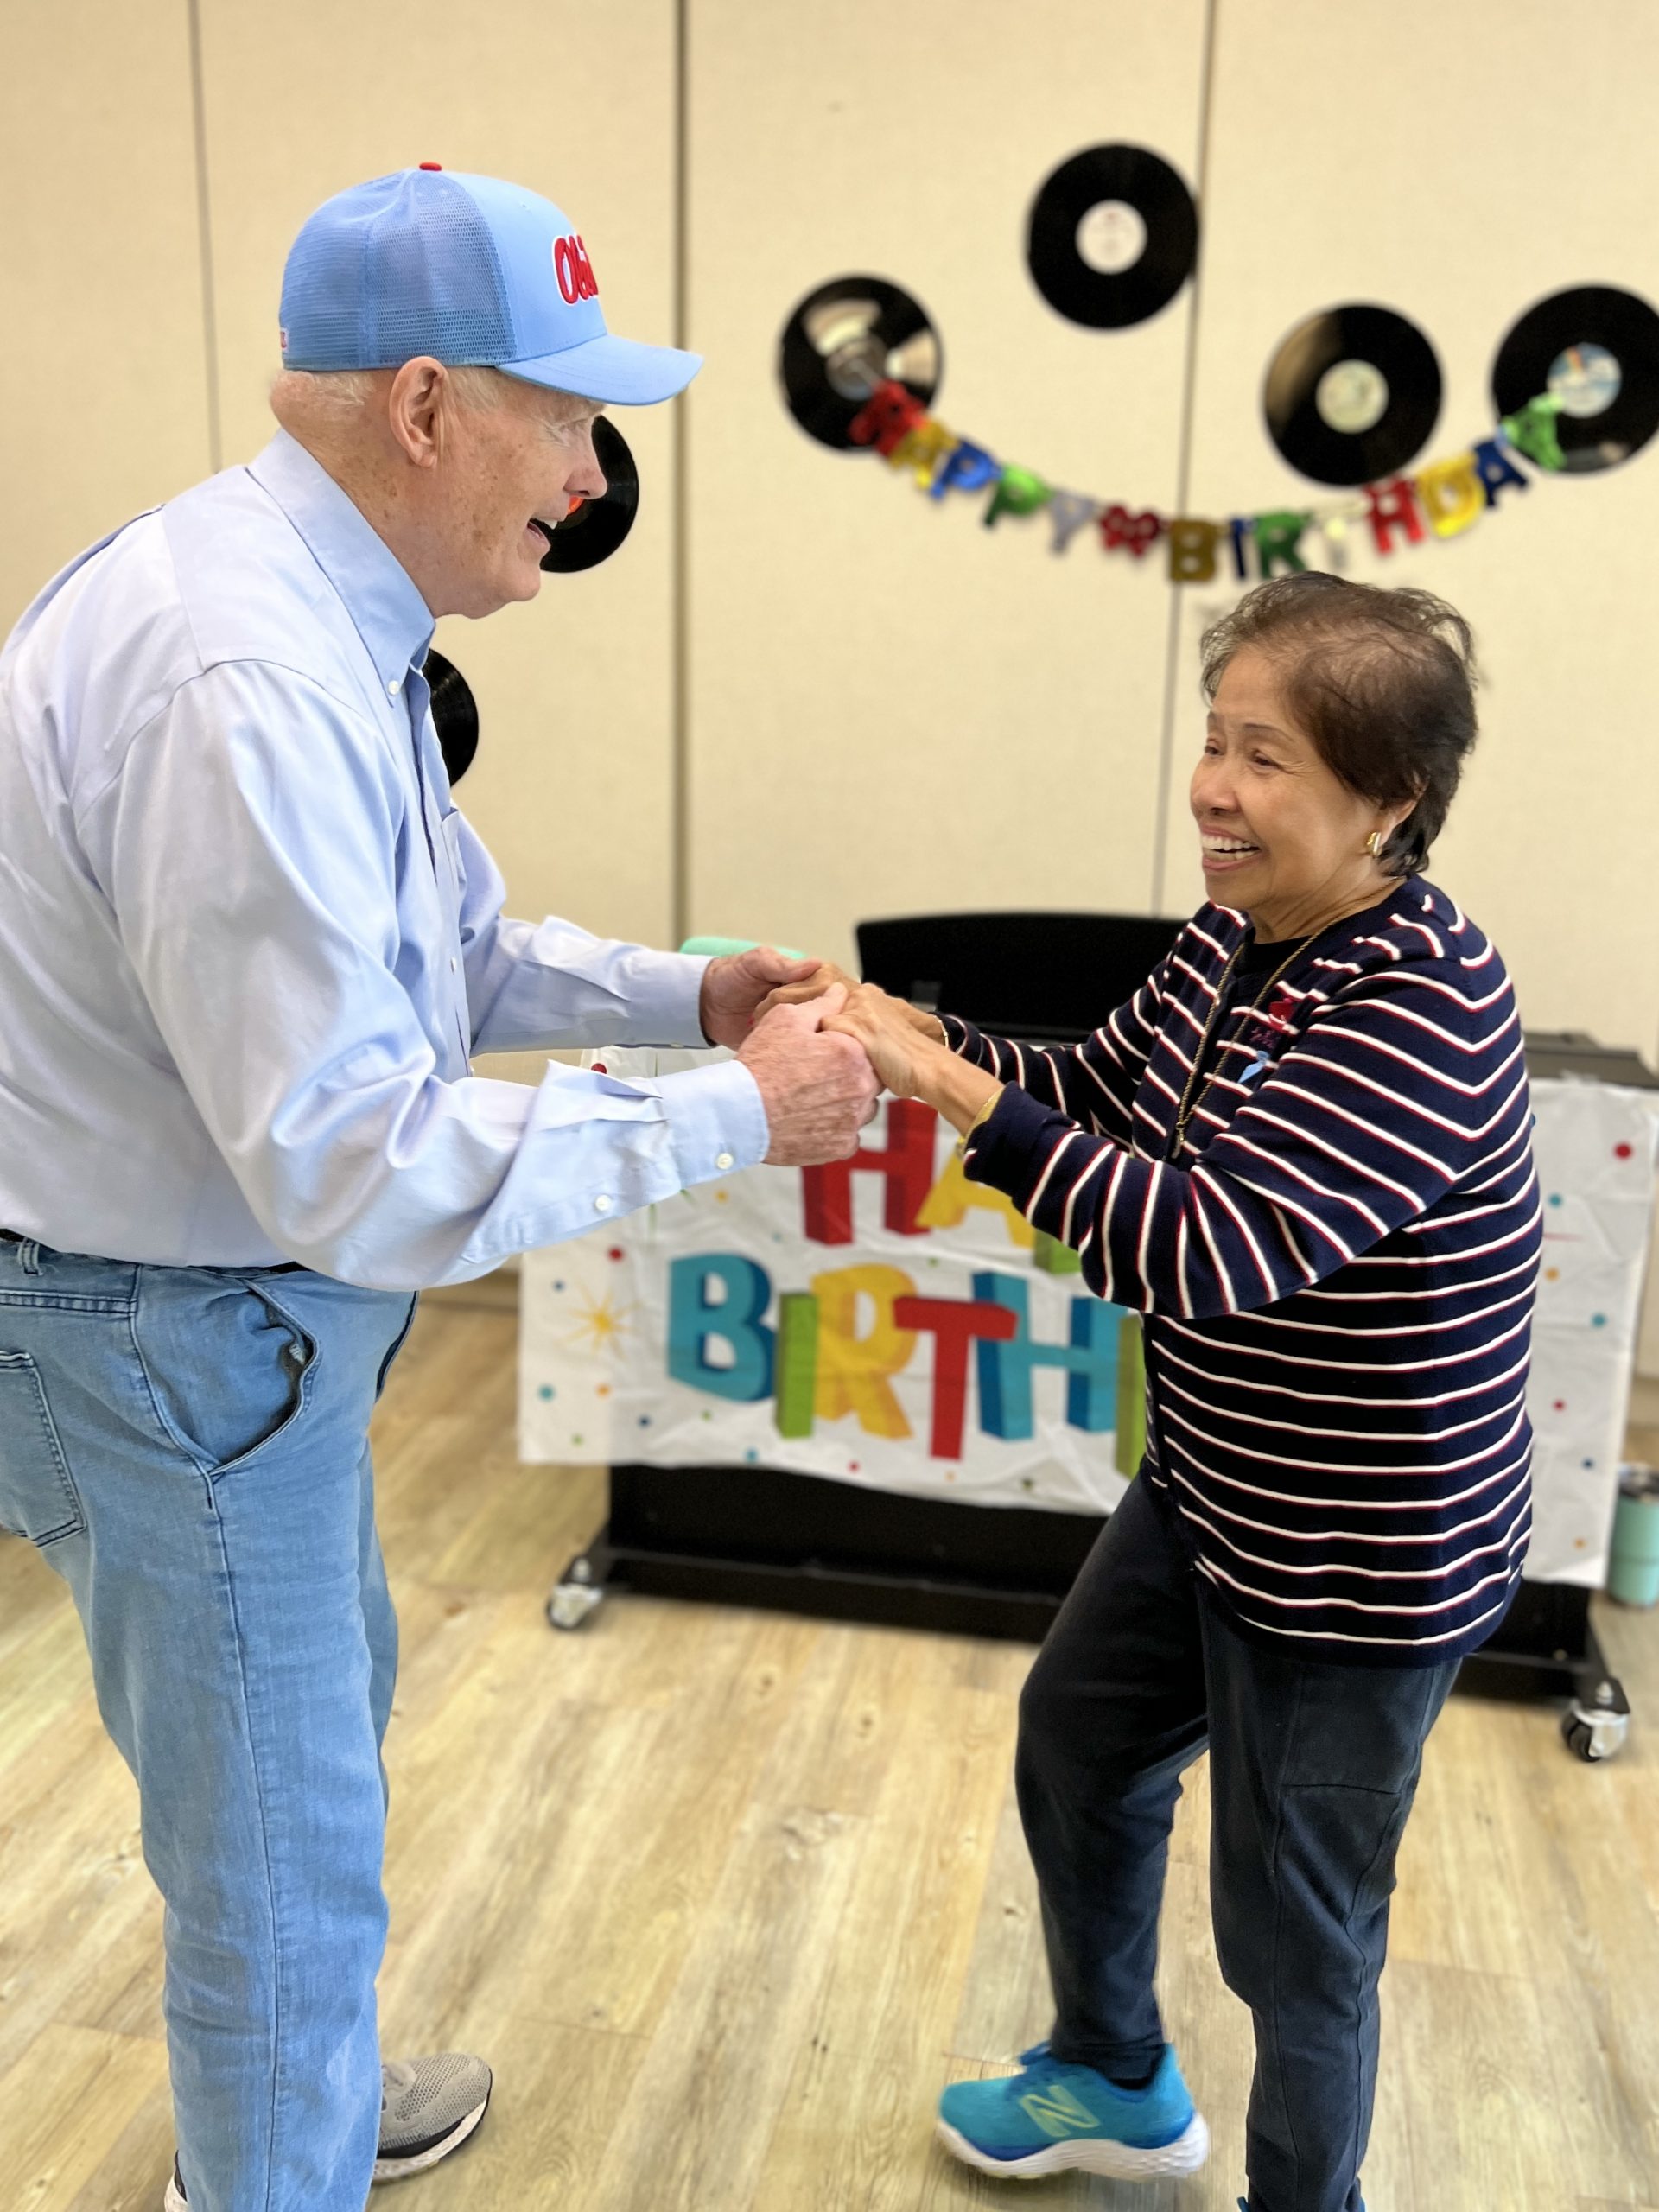 An elderly man and woman dance together at a birthday party hosted by Abe's Garden Community Group